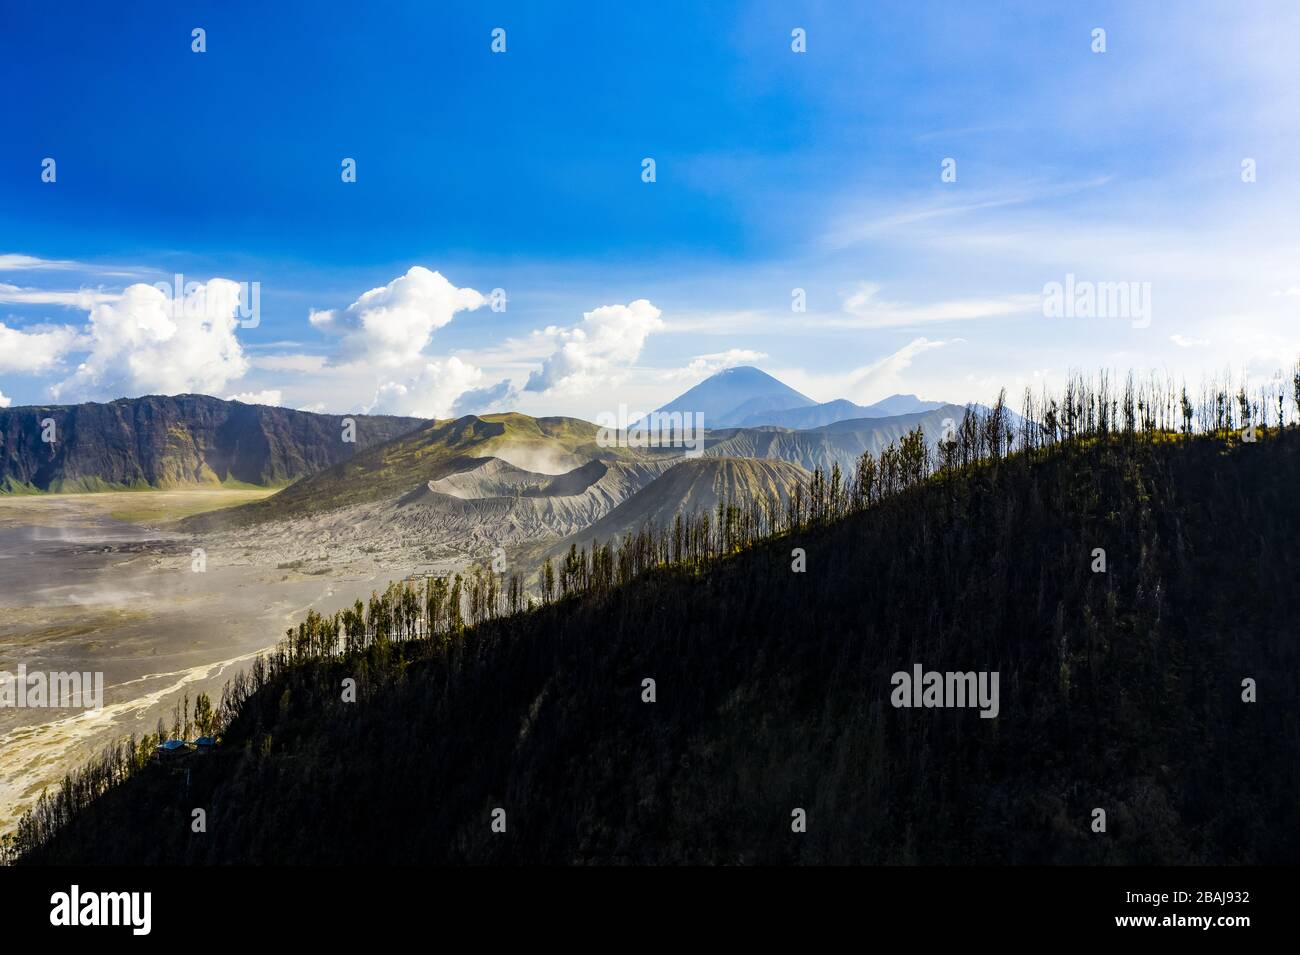 View from above, stunning aerial view of the Mount Bromo crater in the background and a silhouette of an hill in the foreground. Stock Photo